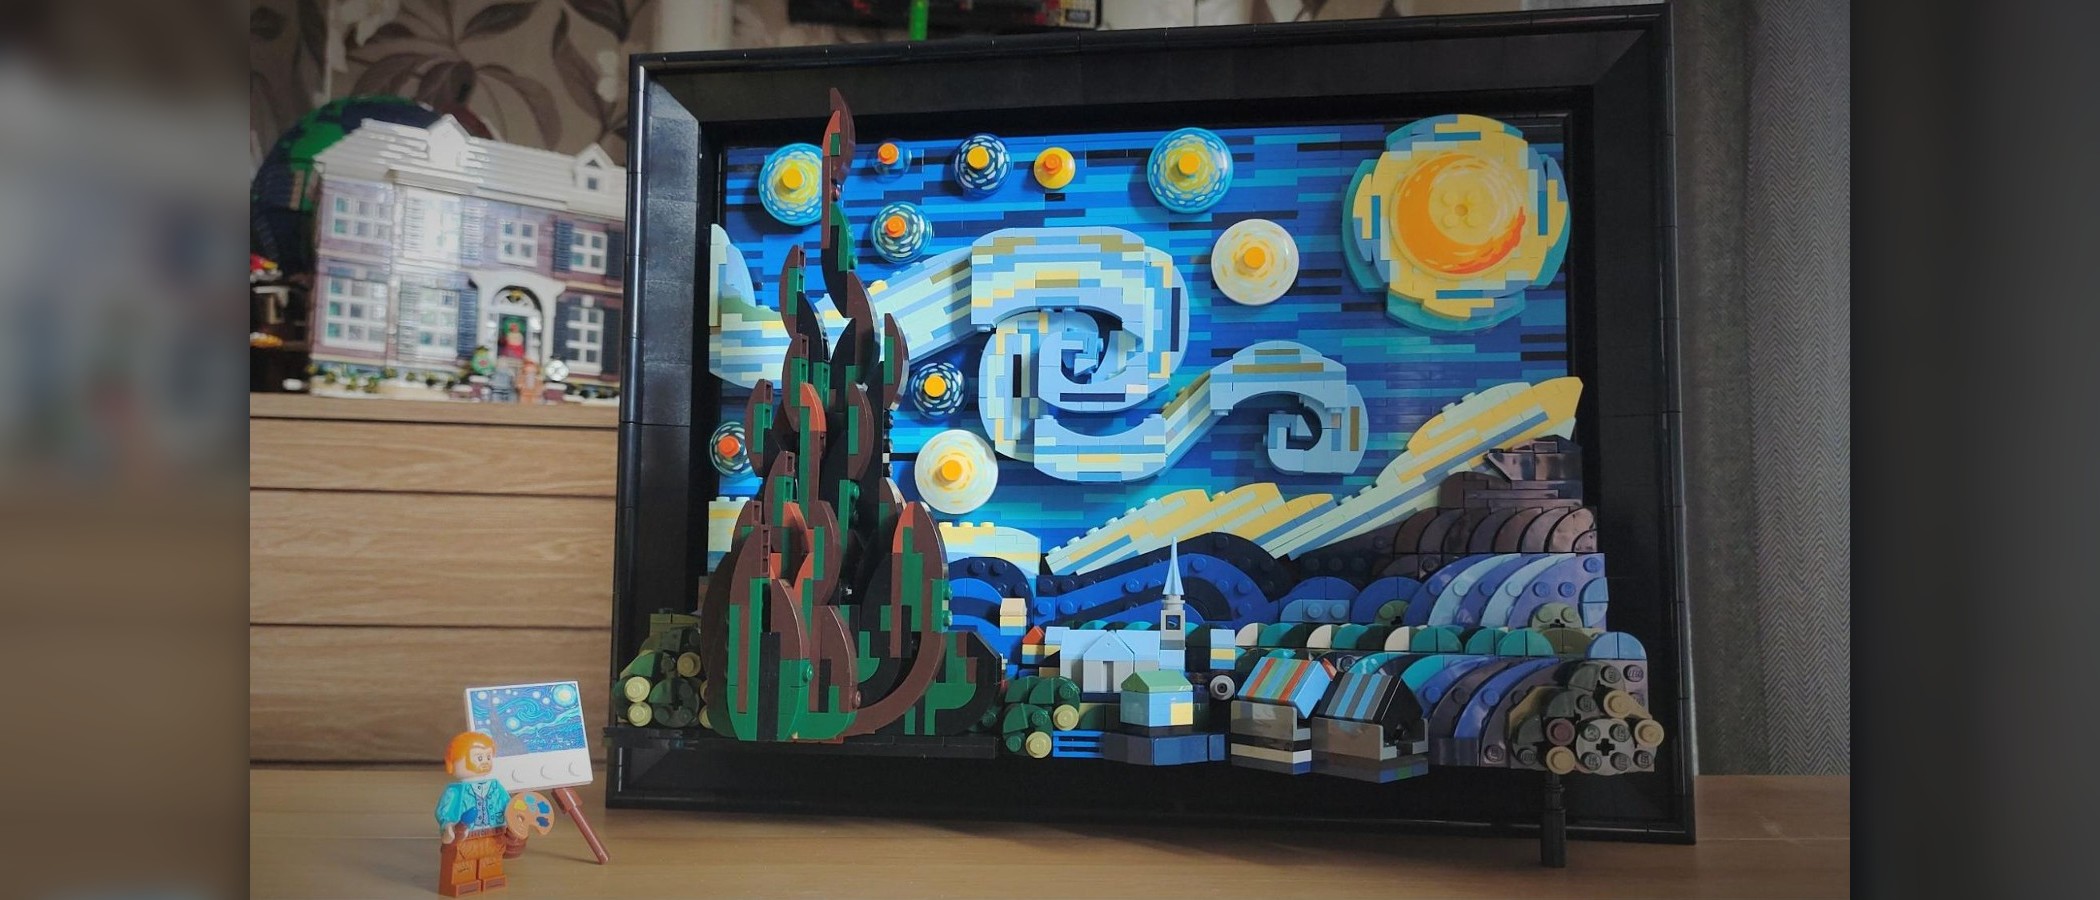 LEGO Vincent van Gogh The Starry Night Review 